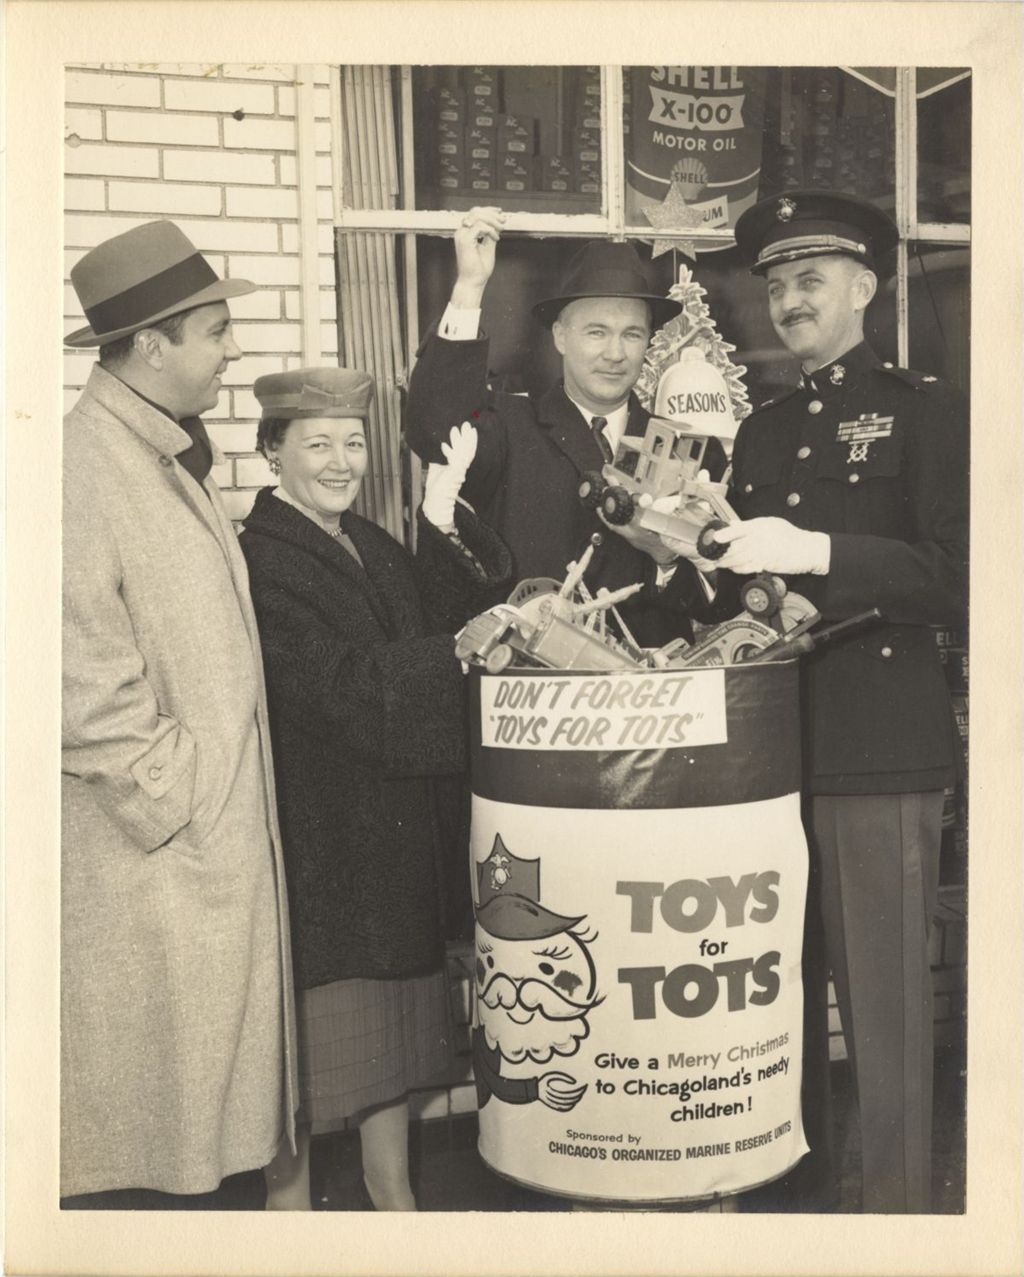 Miniature of Eleanor Daley with the Toys for Tots collection bin